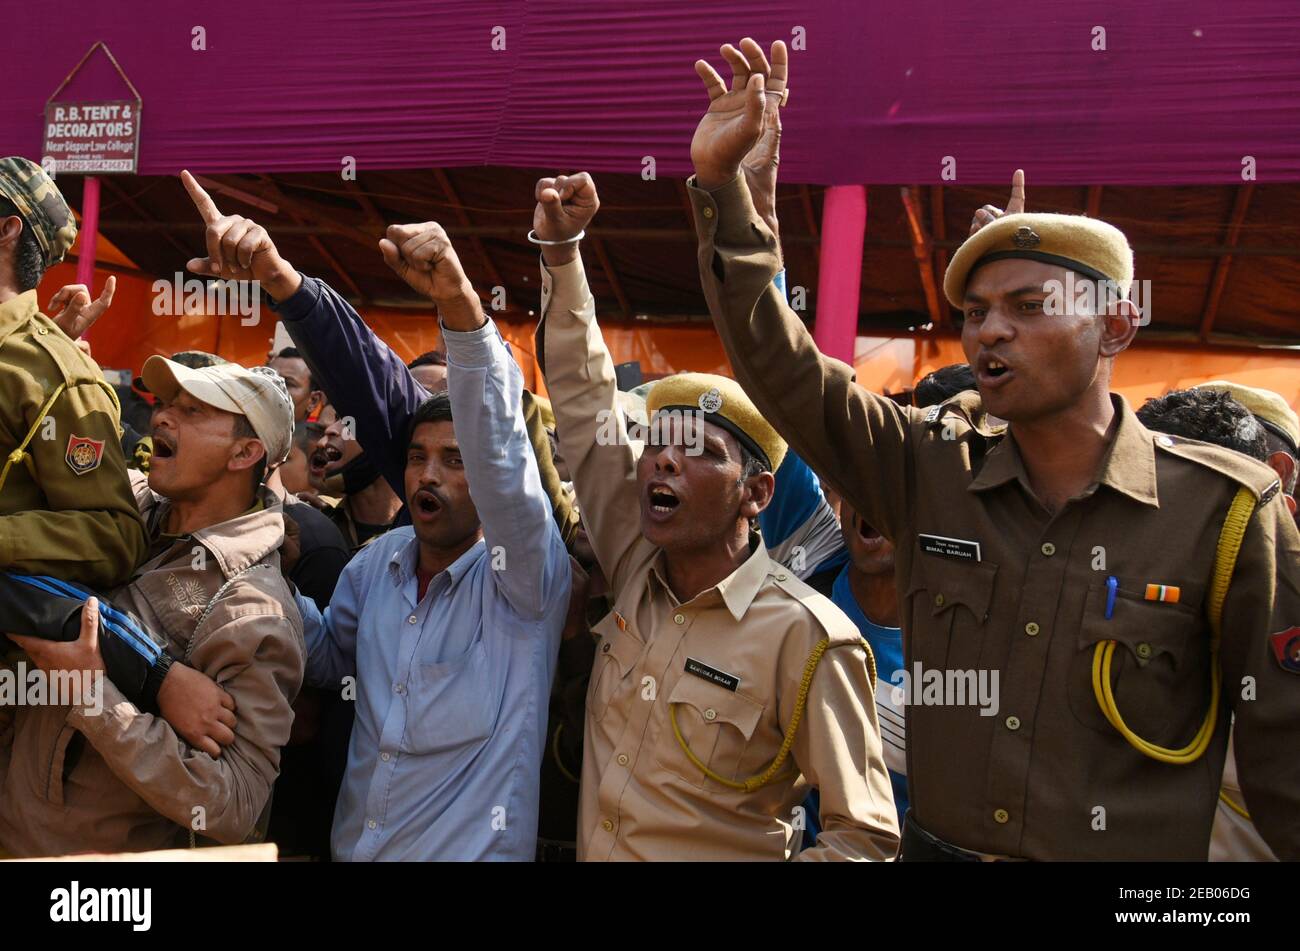 Guwahati, Assam, India. 11th Feb, 2021. All Assam Trained Home Guard Association members during their protest demanding for the regularization of their jobs, at Dispur Last Gate in Guwahati, India on Thursday, Feb. 11, 2021. Credit: David Talukdar/ZUMA Wire/Alamy Live News Stock Photo